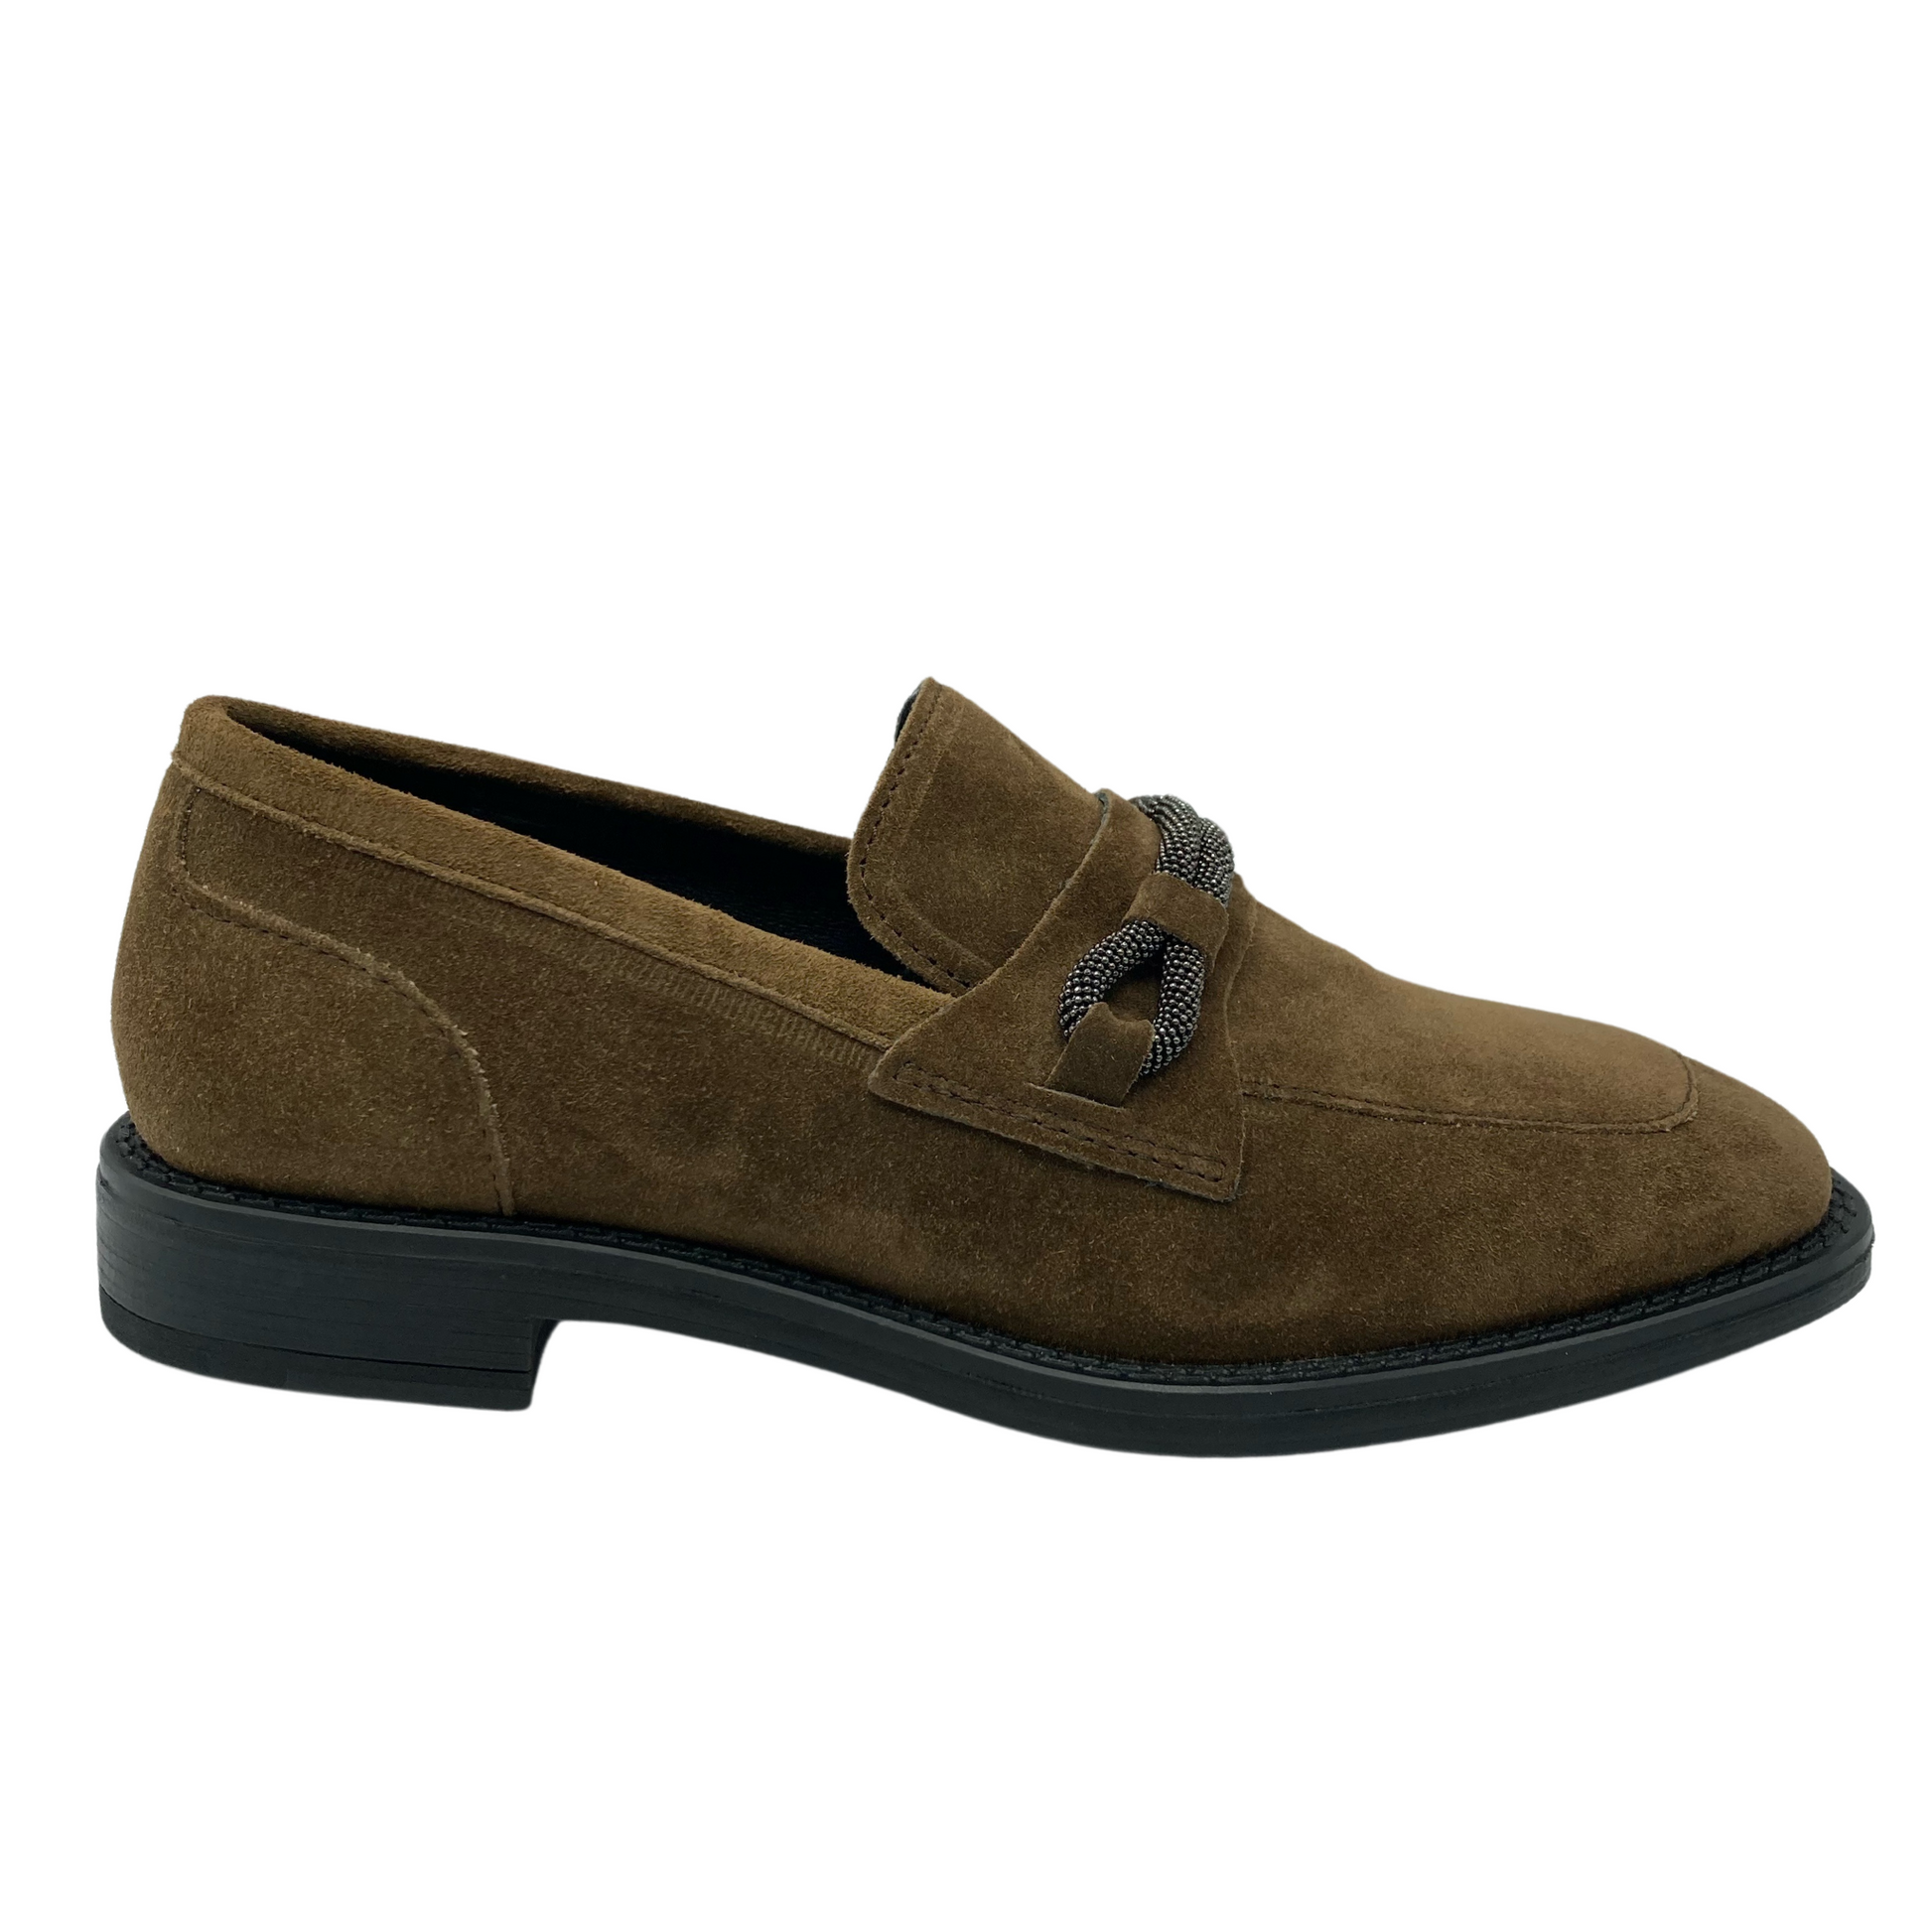 Right facing view of brown suede loafer with black outsole and detail on upper